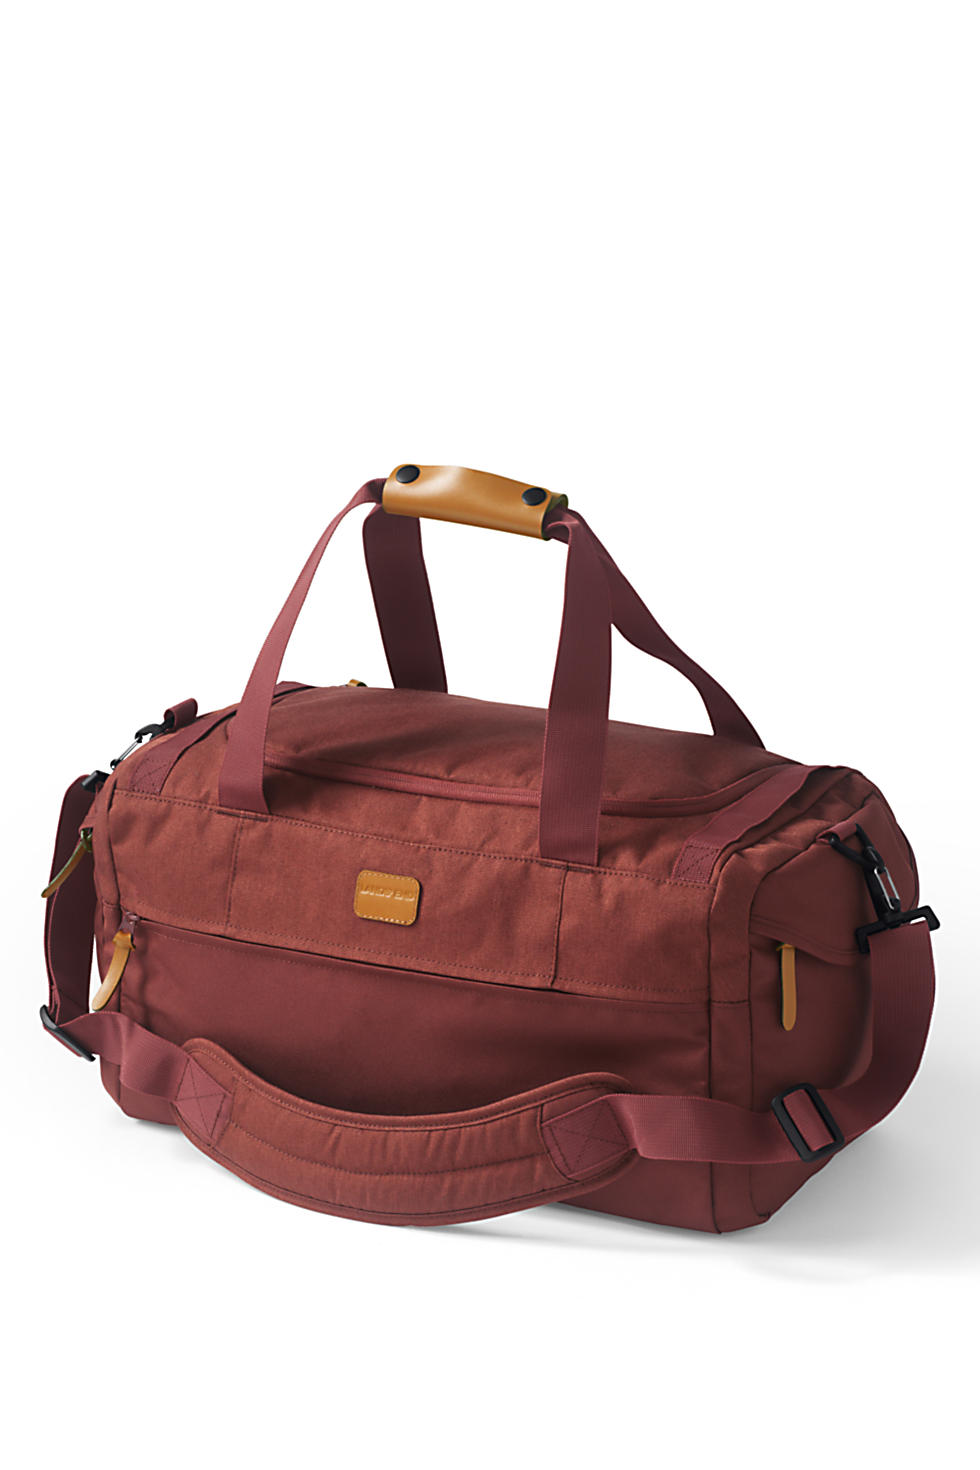 Lands End Small Everyday Travel Duffle Bag (Rust Red)